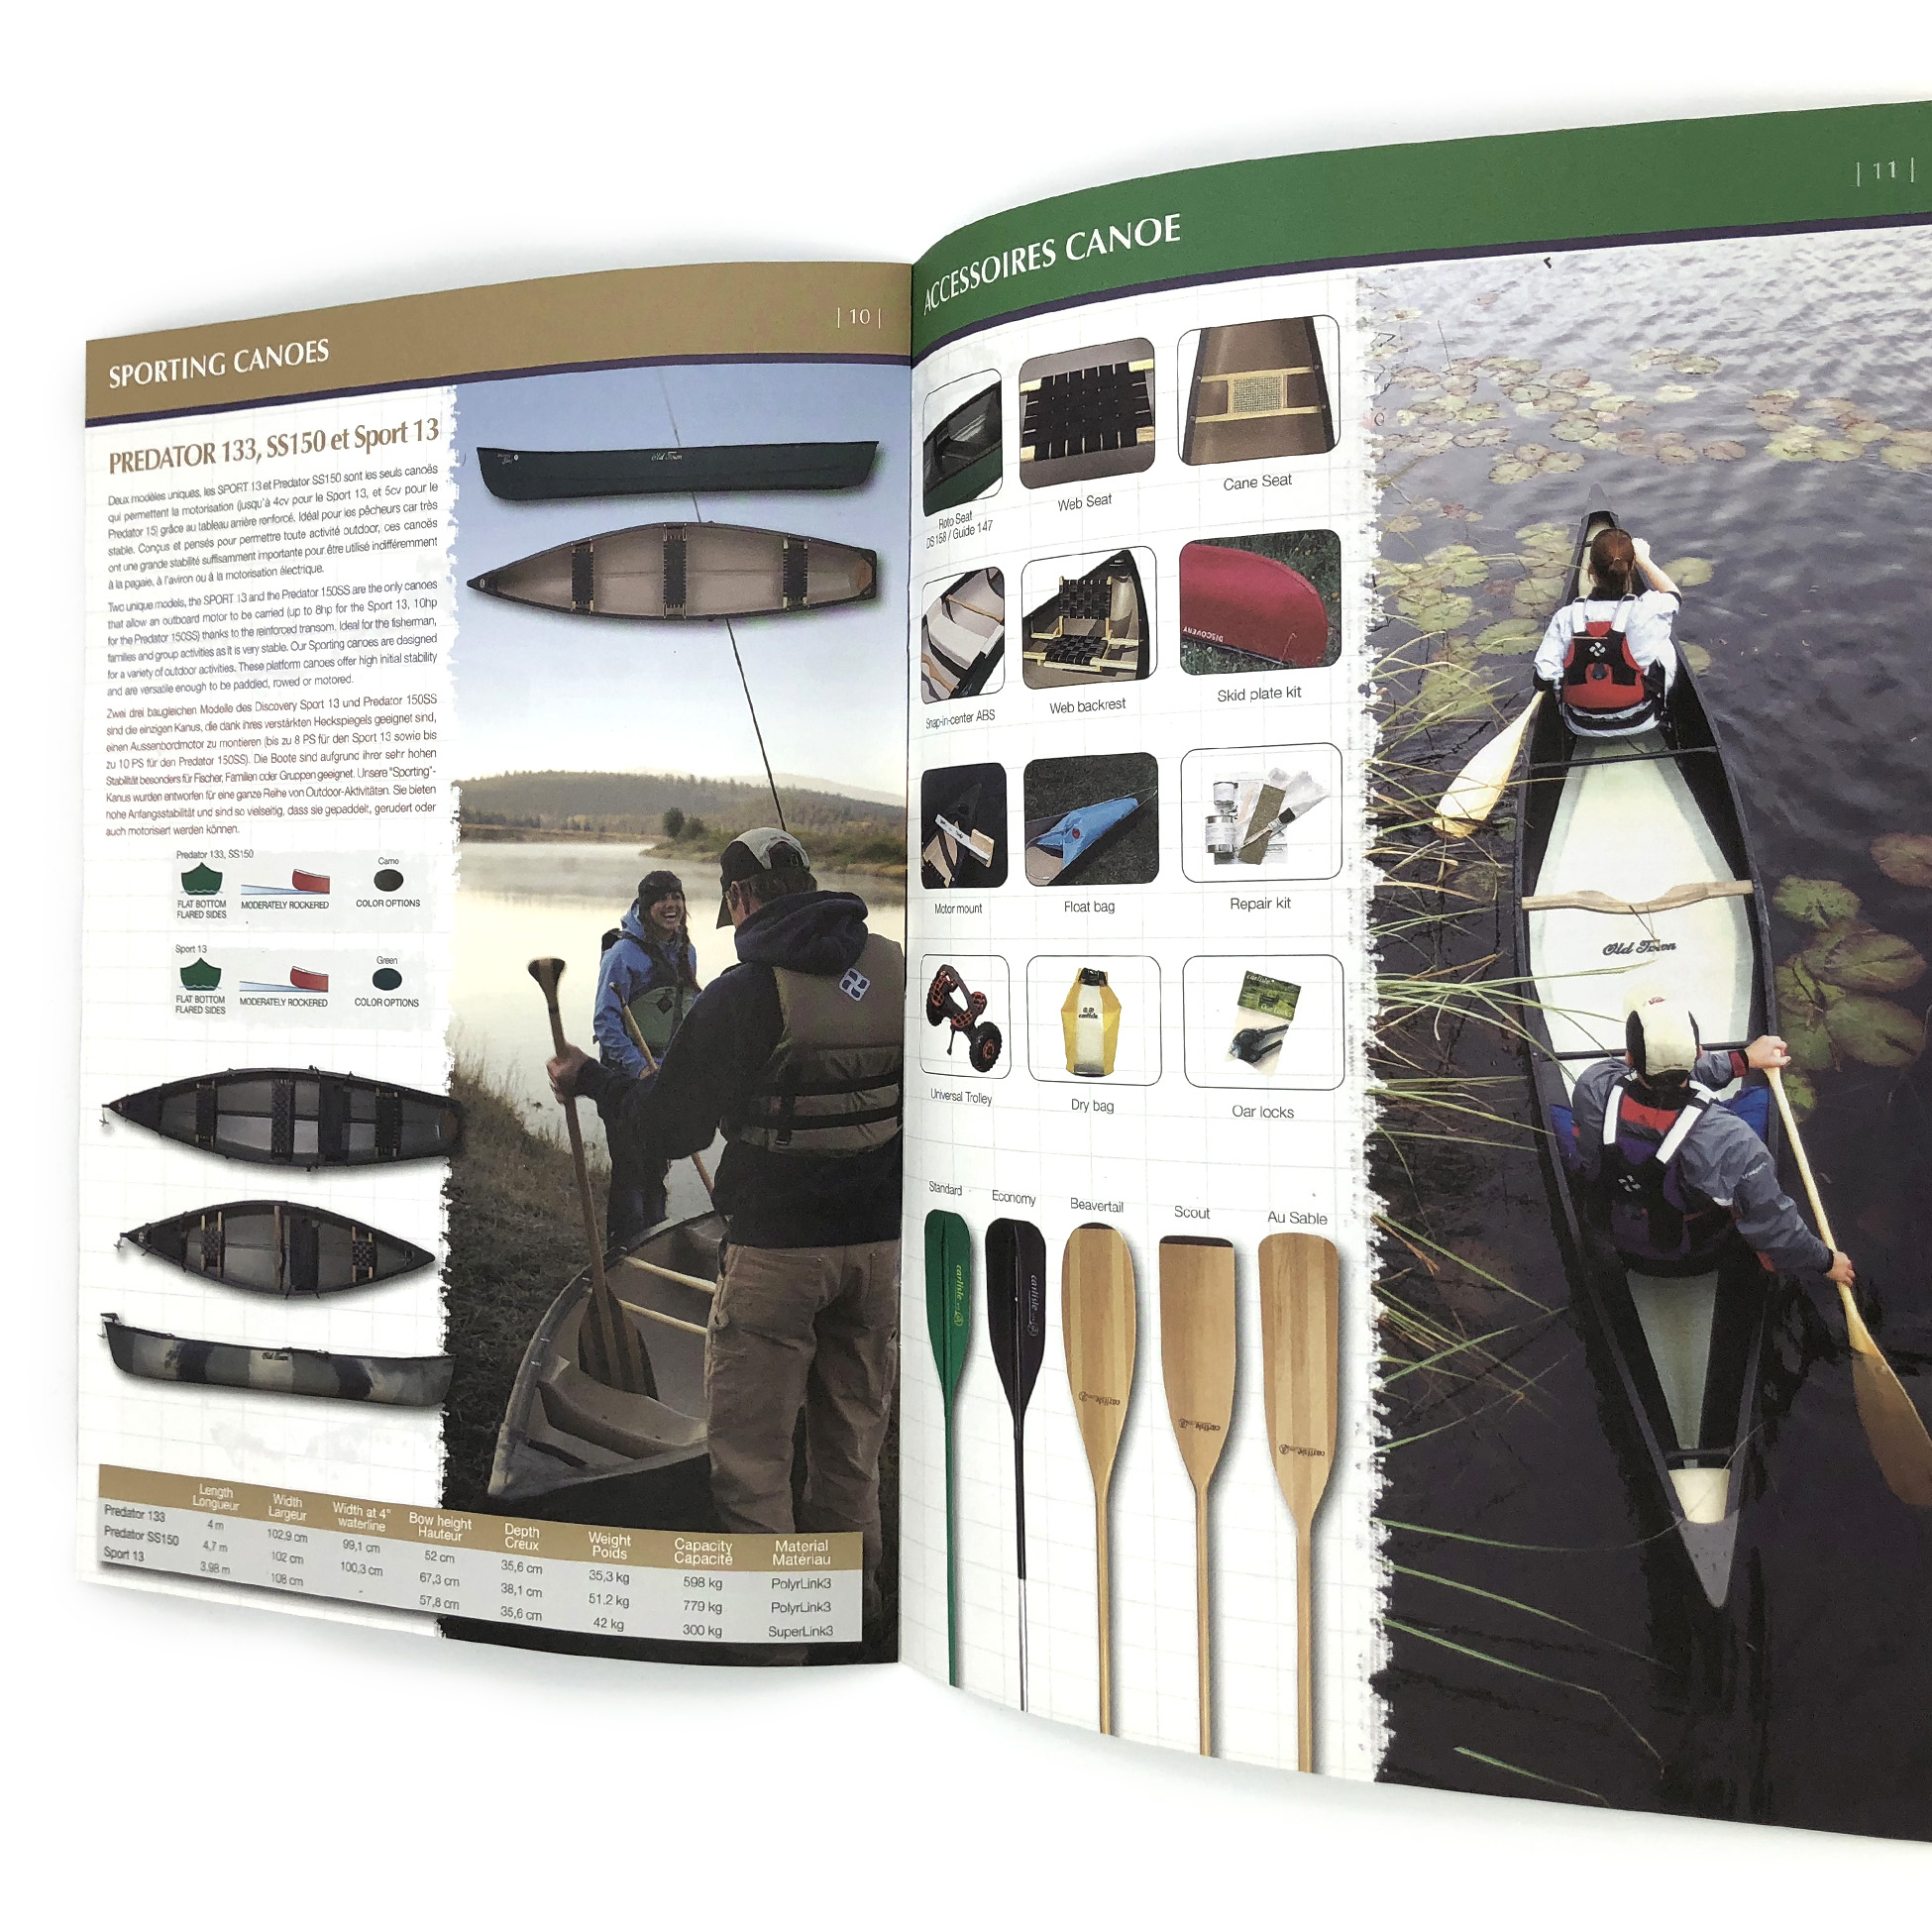 Johnson Outdoors - Brochure Old Town 2008